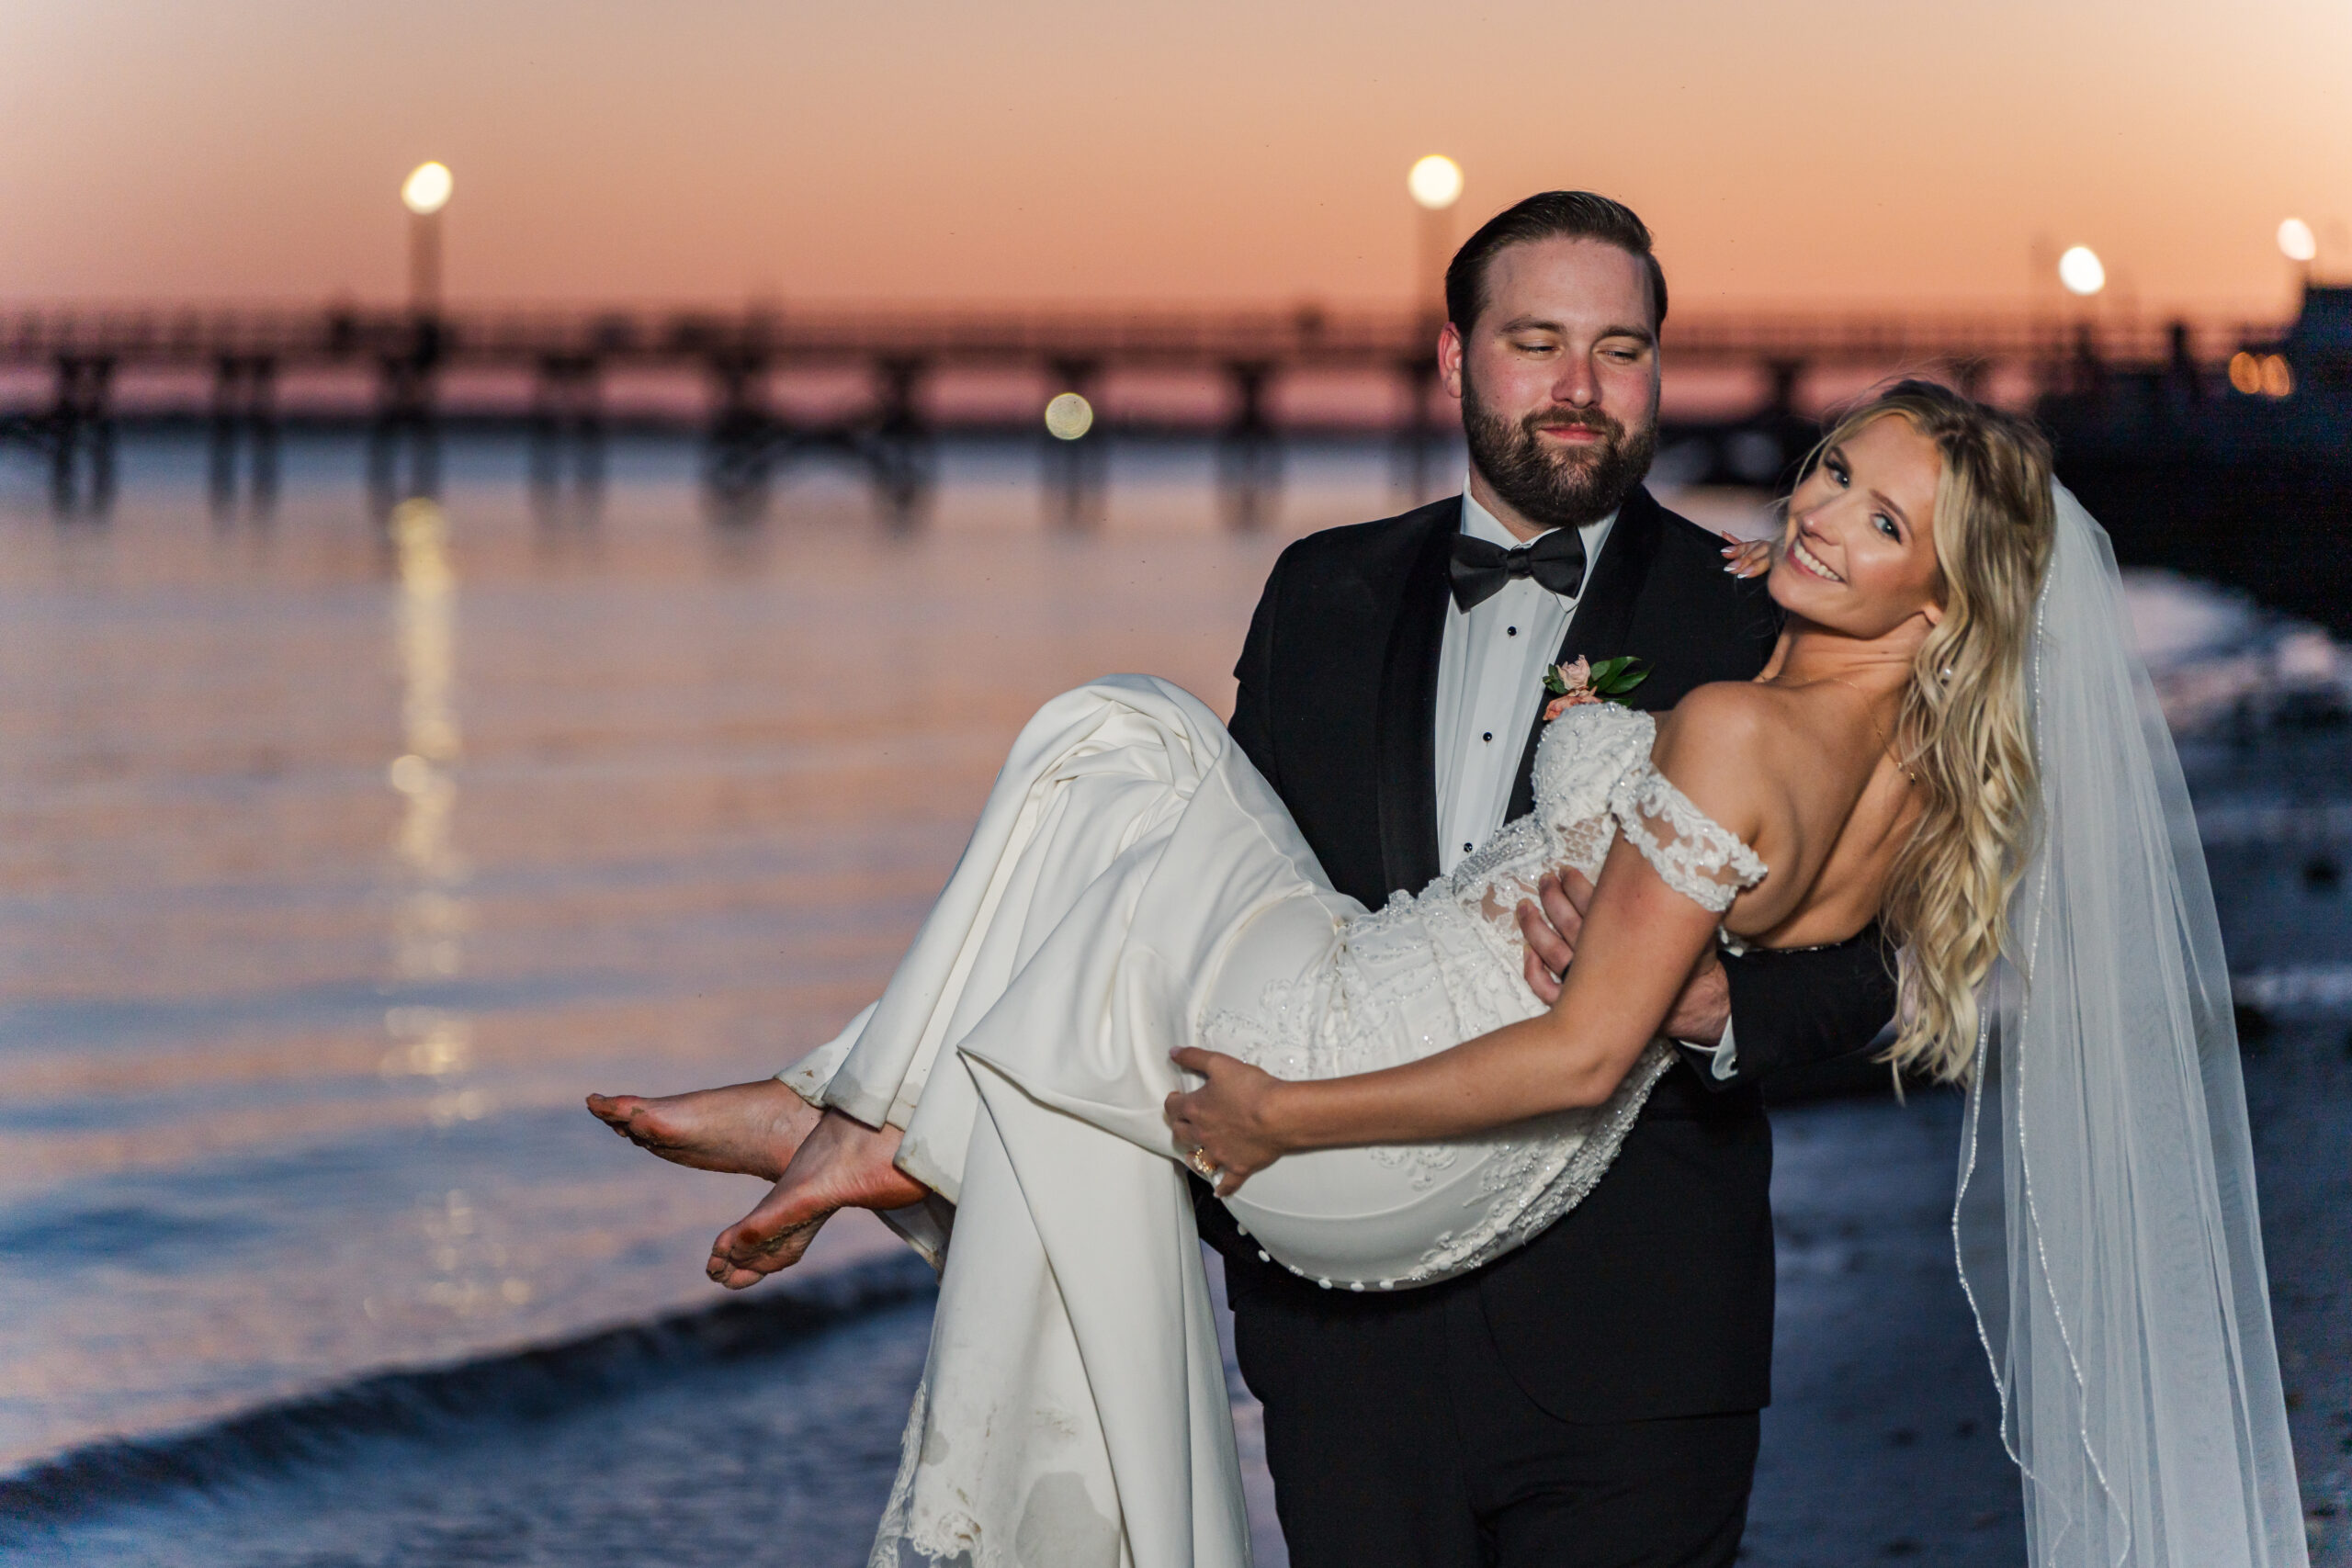 Groom carries his bride in his arms as he walks along the beach at sunset. The pier is visible off in the distance and the orange sunset reflects off of the ocean waves.